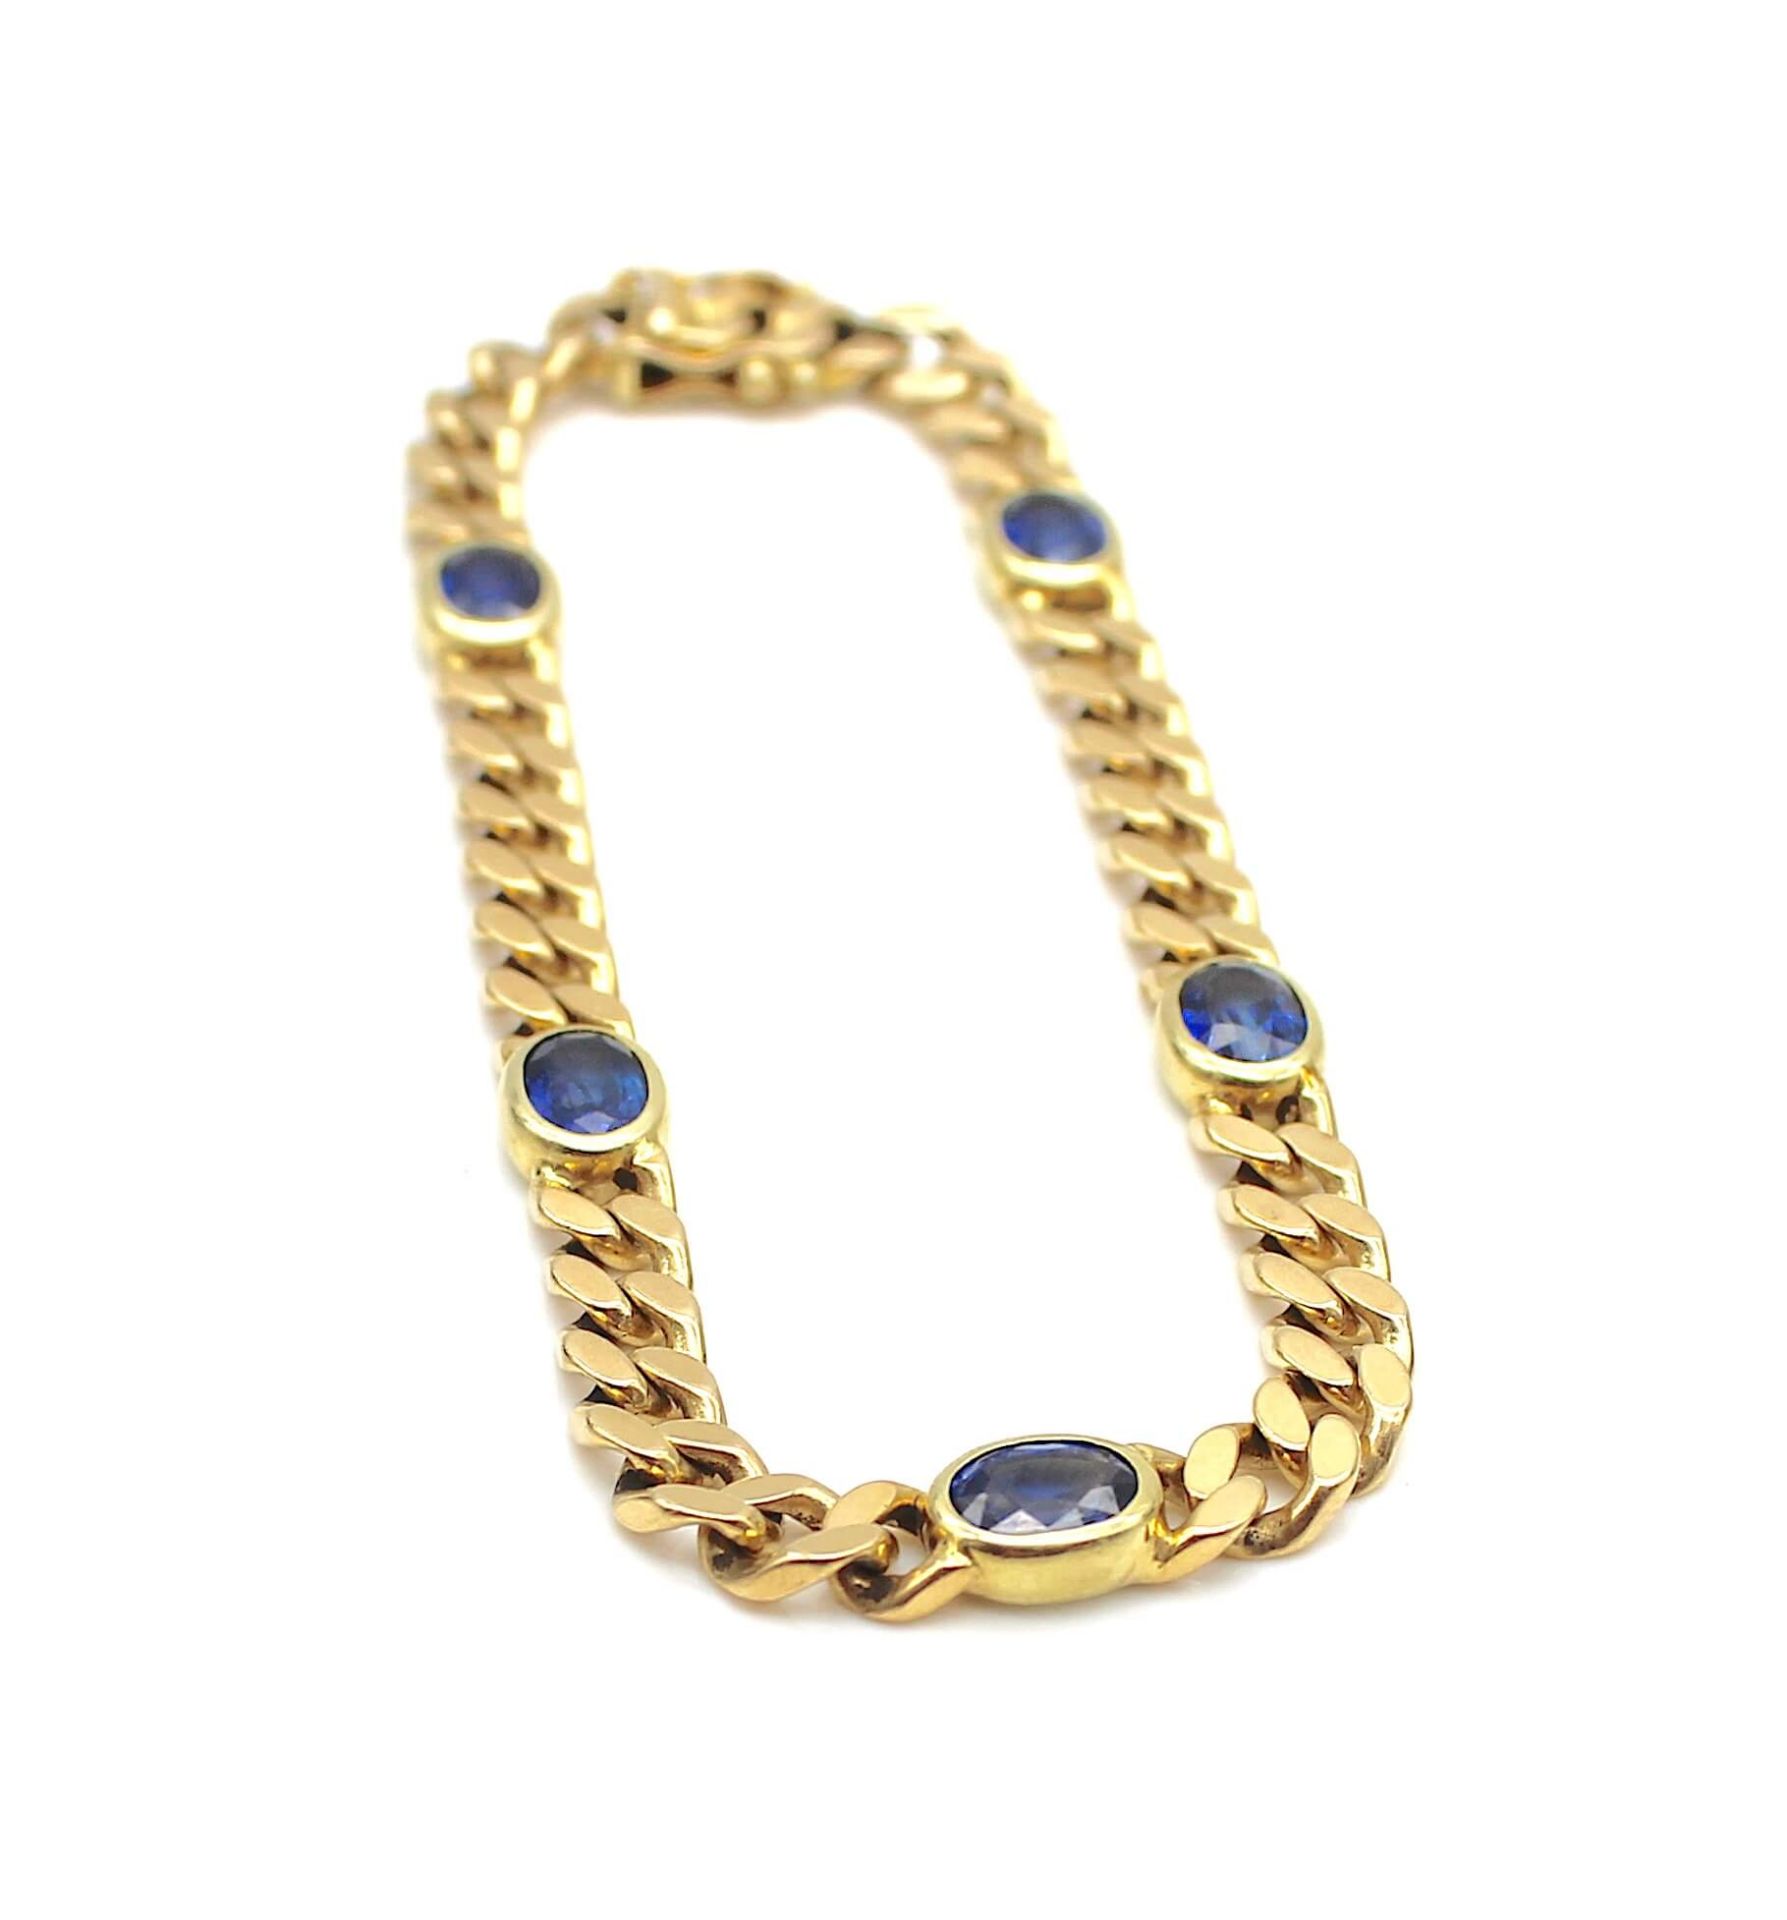 Bracelet with beautiful sapphires 585 gold - Image 2 of 4